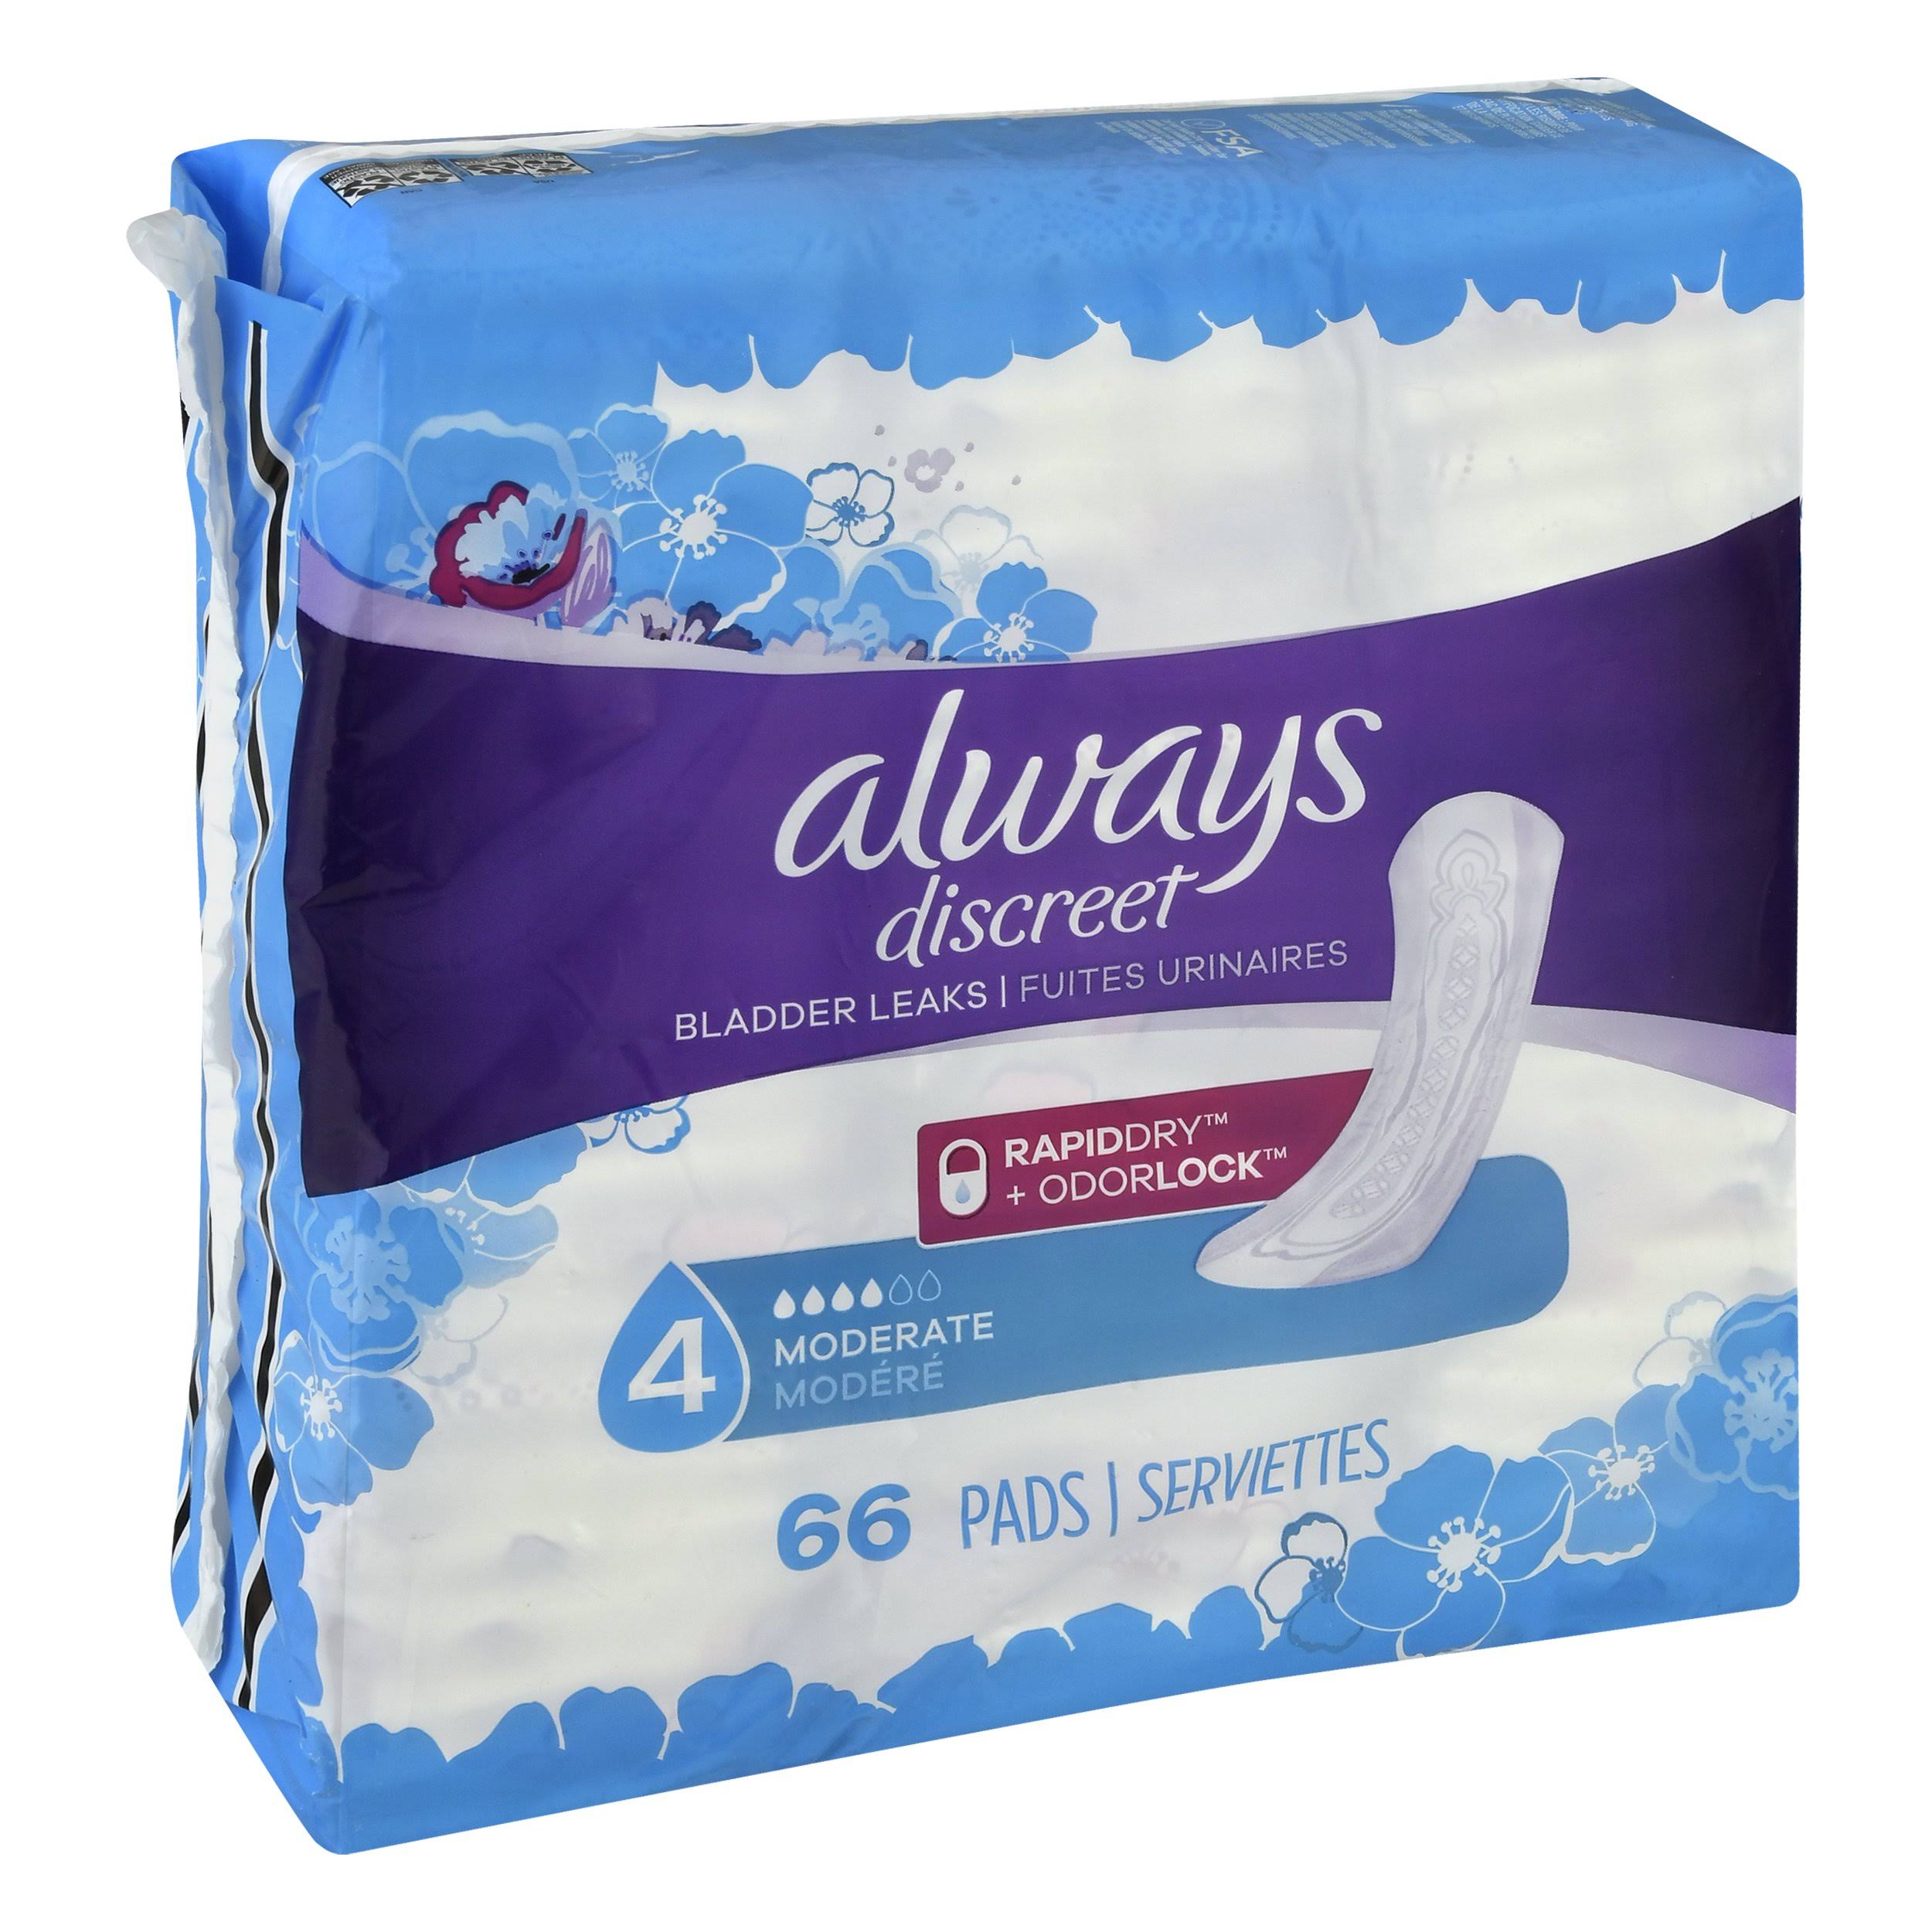 Always discreet moderate incontinence pads, 66 ea